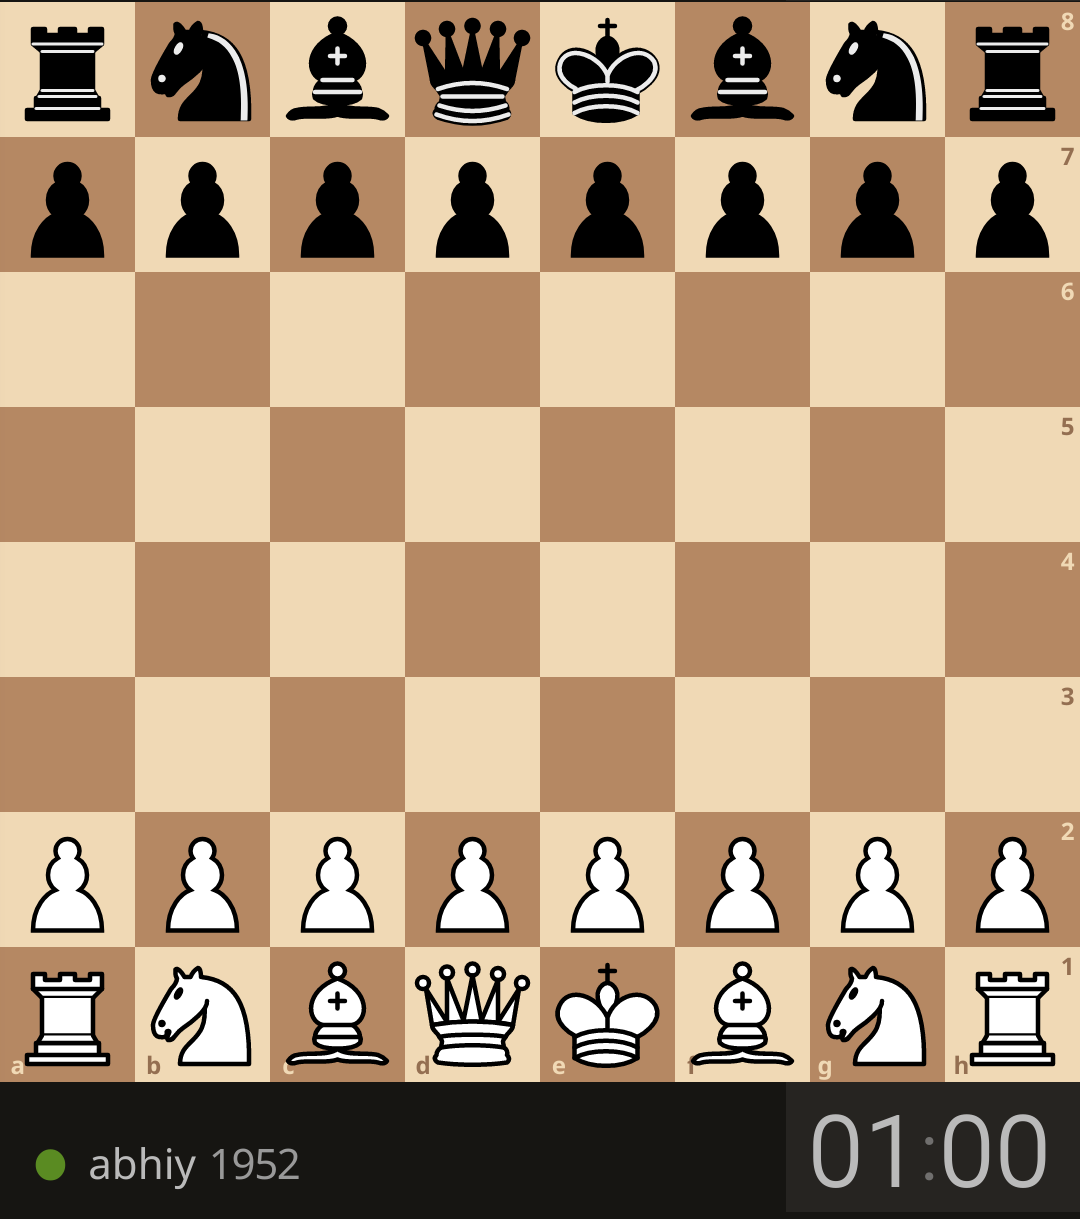 I REACHED MY HIGHEST CHESS RATING EVER 